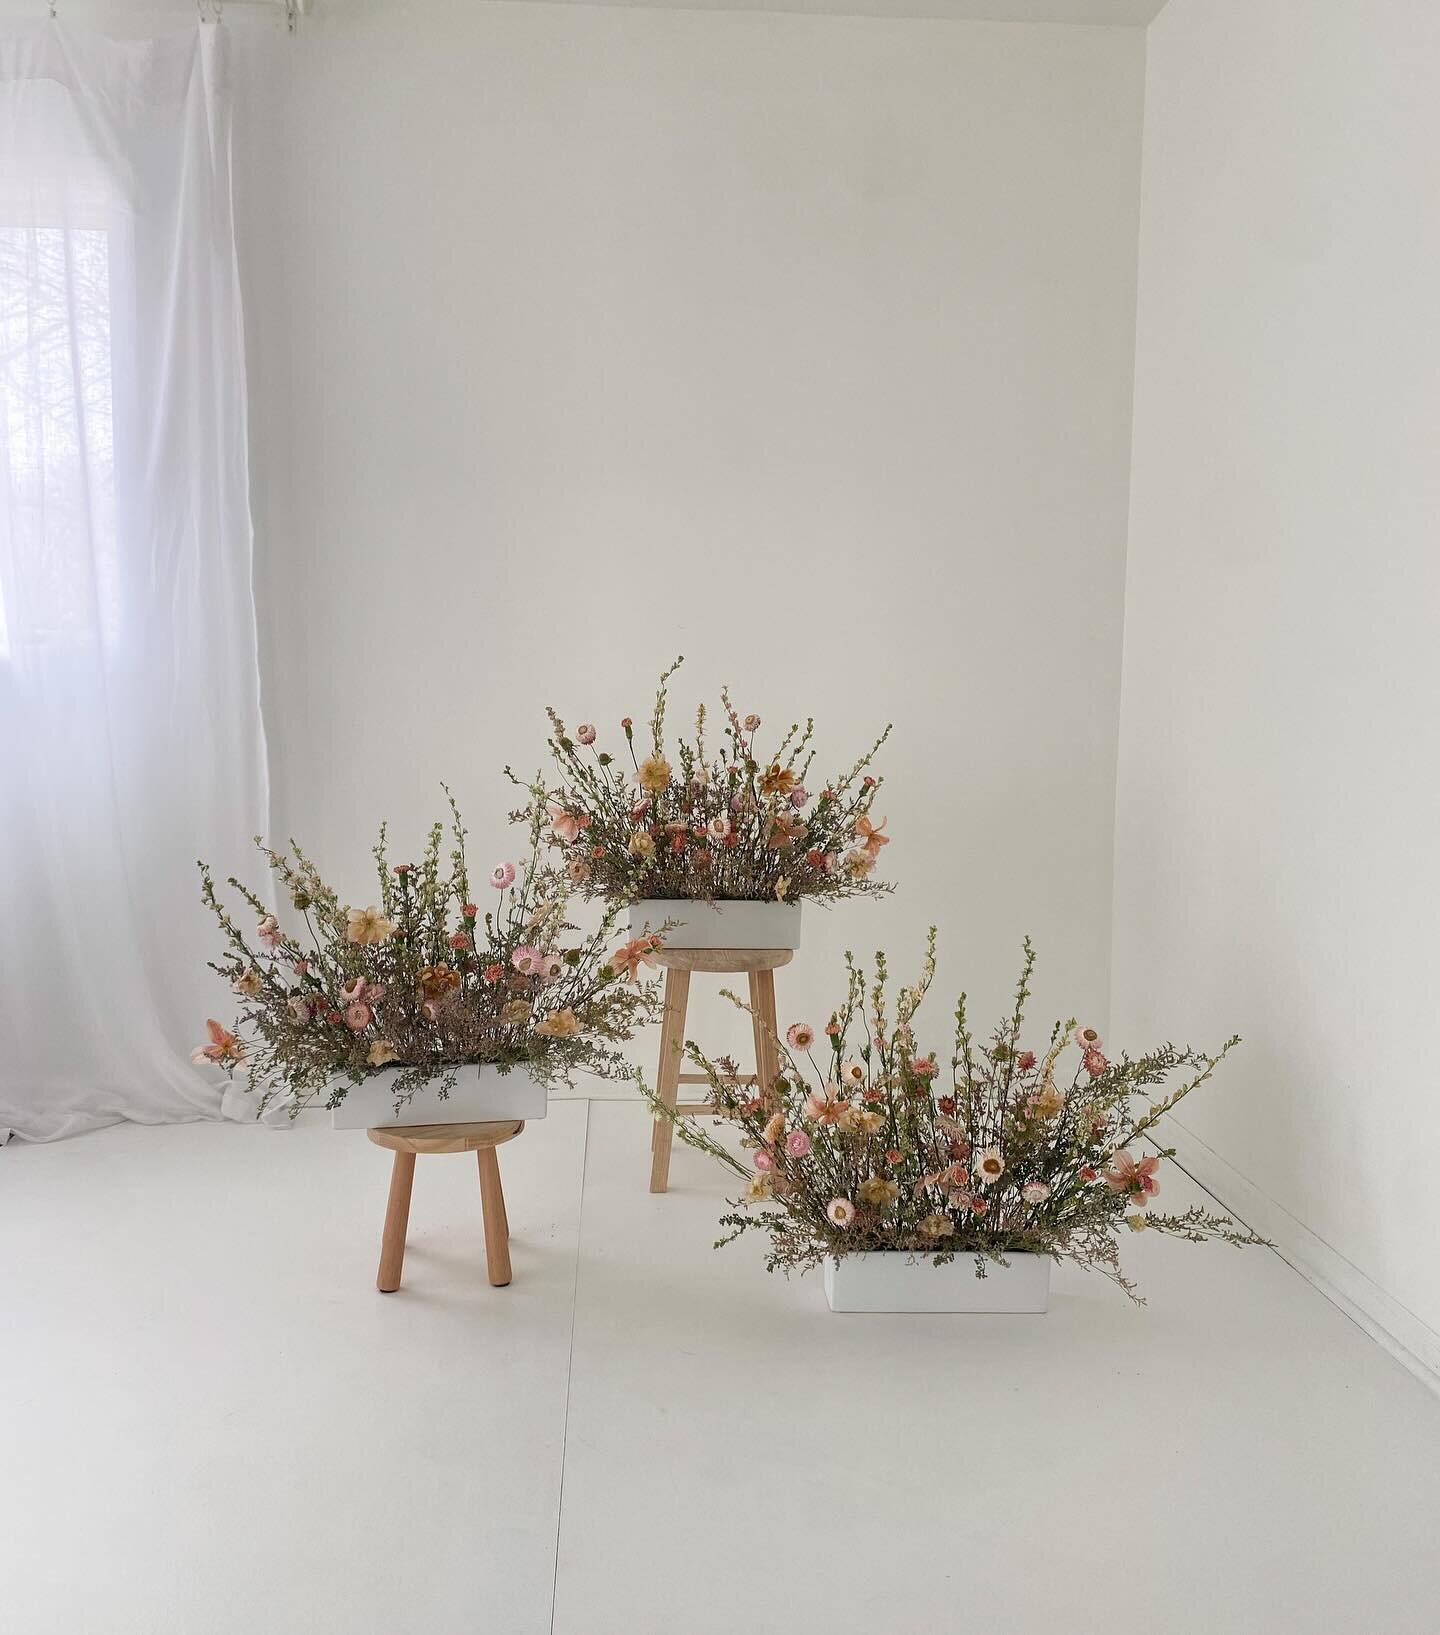 Our dried spring wildflower floral arrangements and temporary (moveable) white flooring is now set up in the studio! Cannot wait to see what is created with these! 🌸🫠🌼

We ask that you be extra careful with the arrangements and flooring if and whe